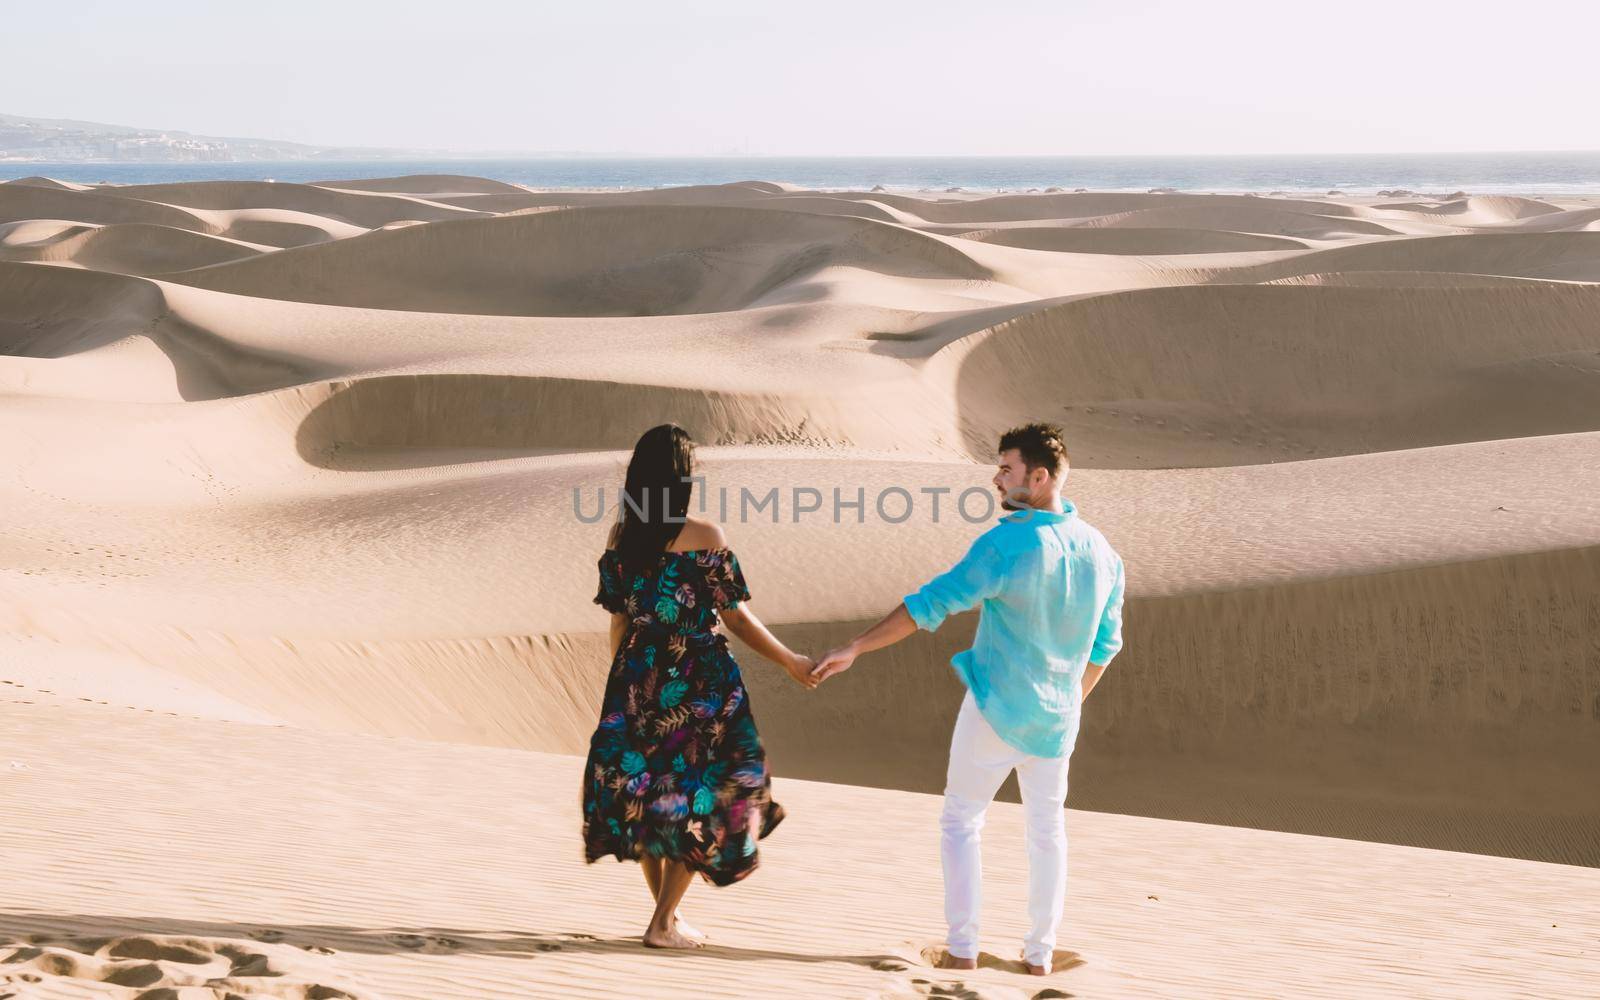 A couple walking at the beach of Maspalomas Gran Canaria Spain, men and woman at the sand dunes desert of Maspalomas Gran Canaria during vacation in Spain